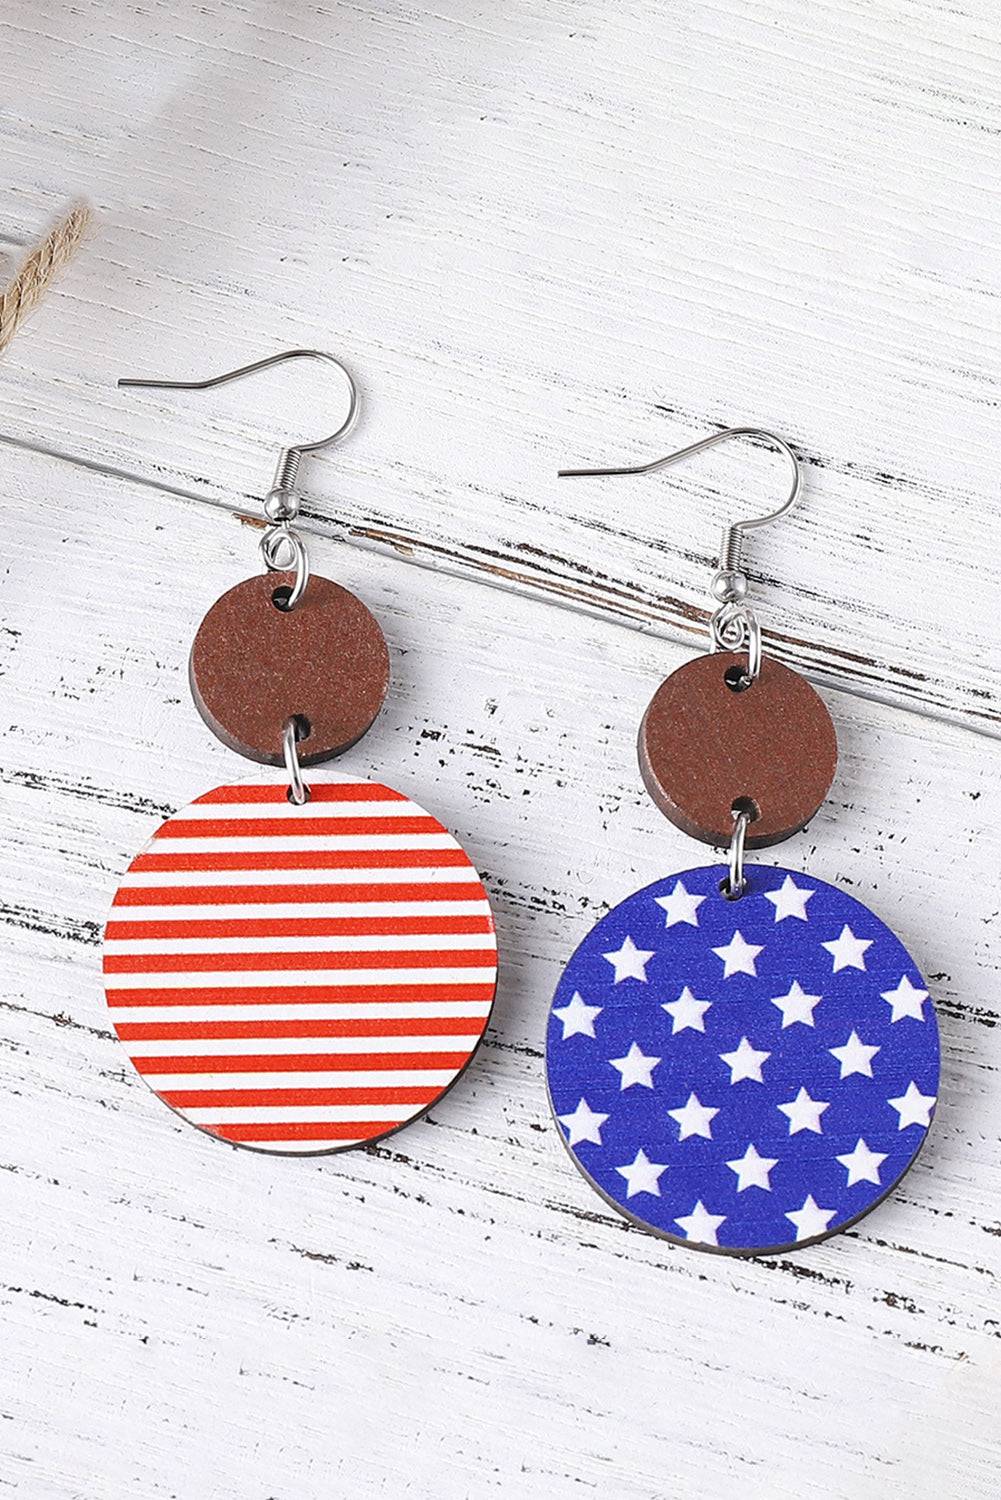 a pair of earrings with an american flag design